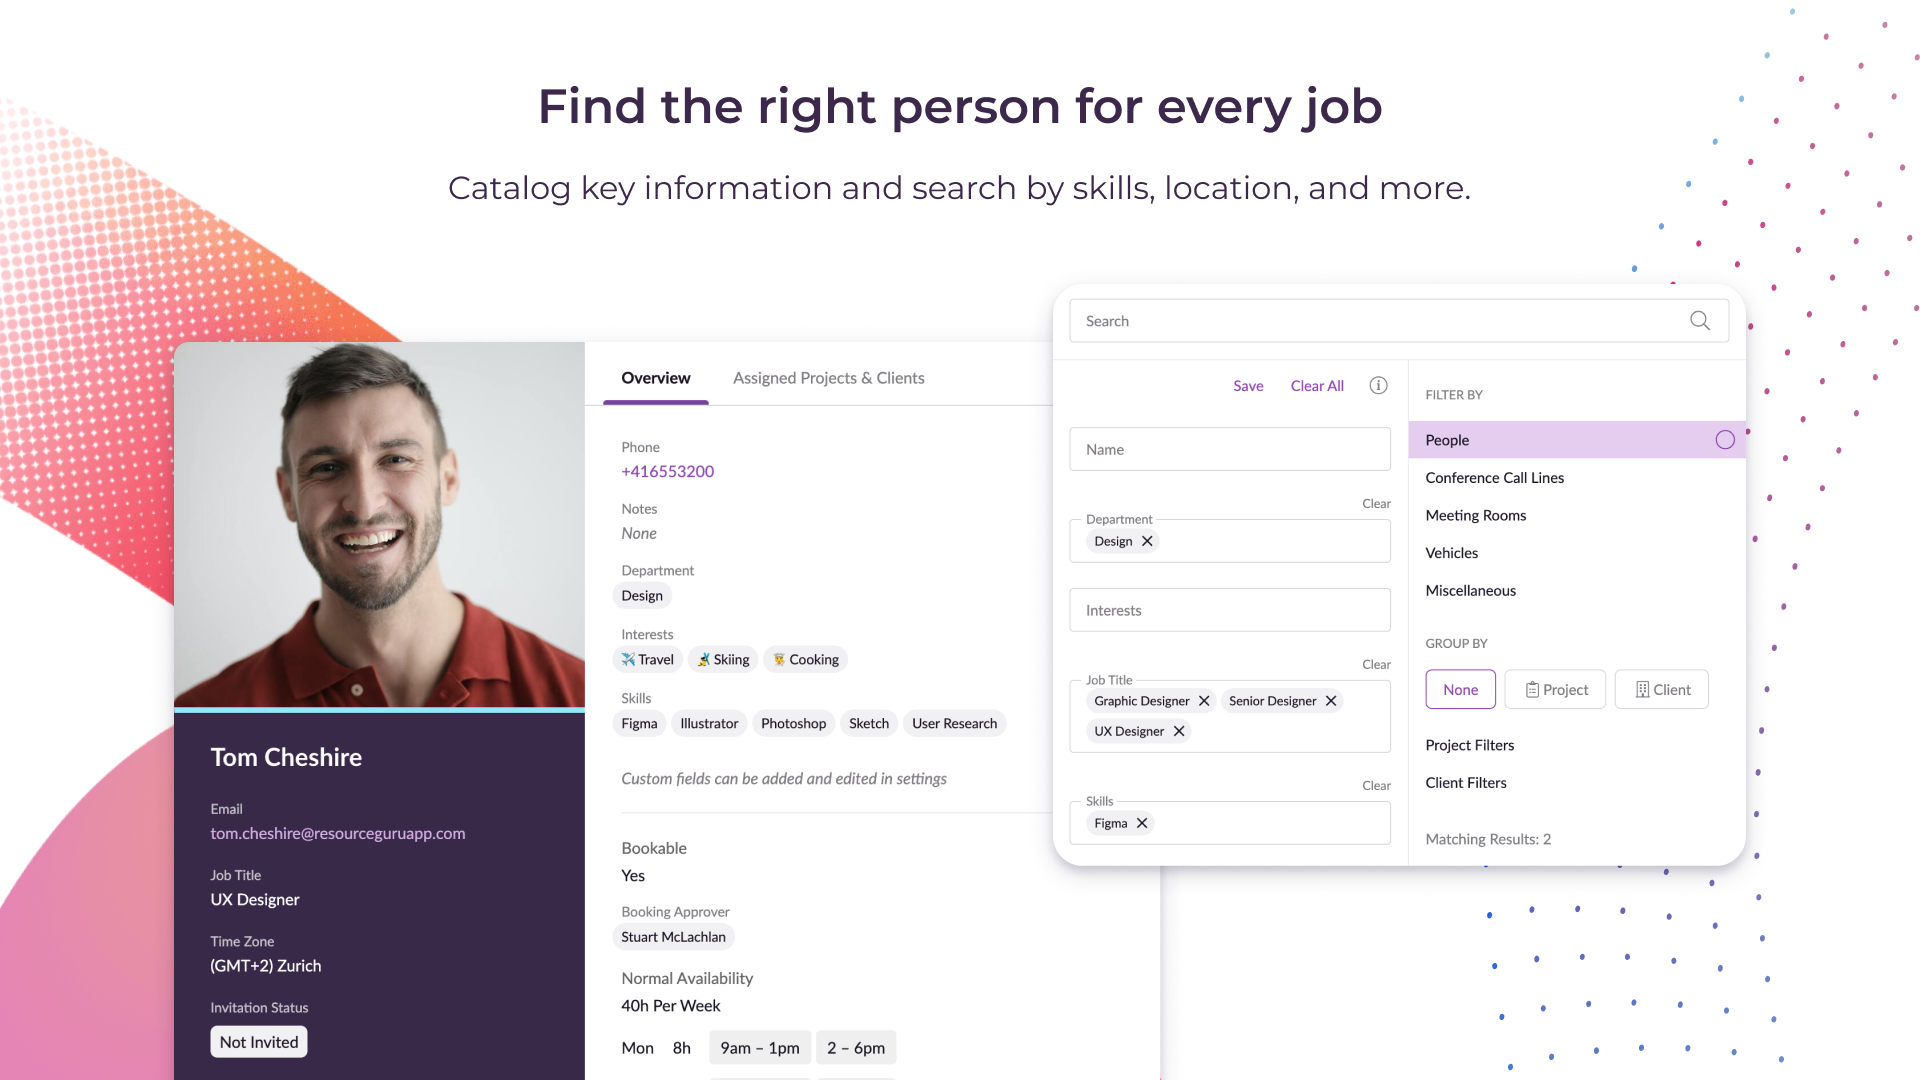 Find the right person for every job. Catalog key information and search by skills, location, and more.